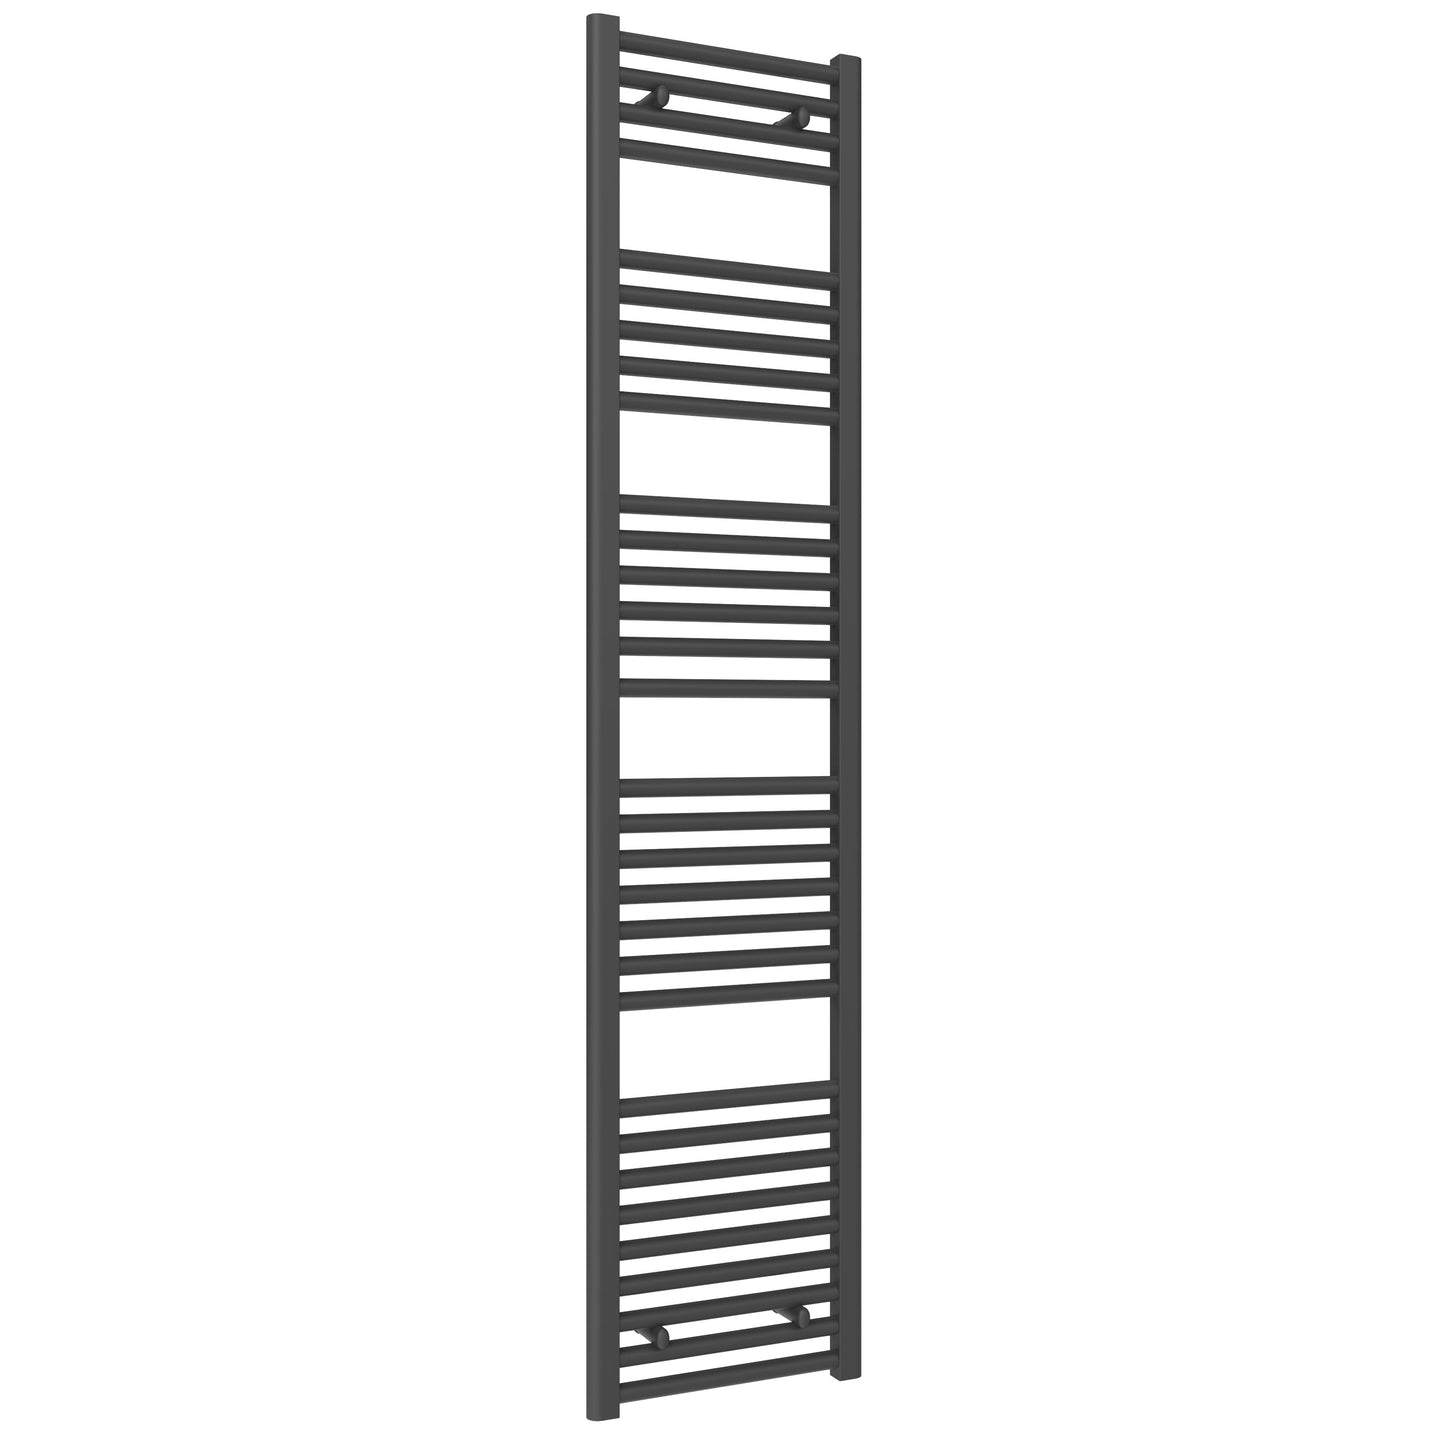 Diva Dual Fuel Heated Towel Rail -Various Sizes - Anthracite